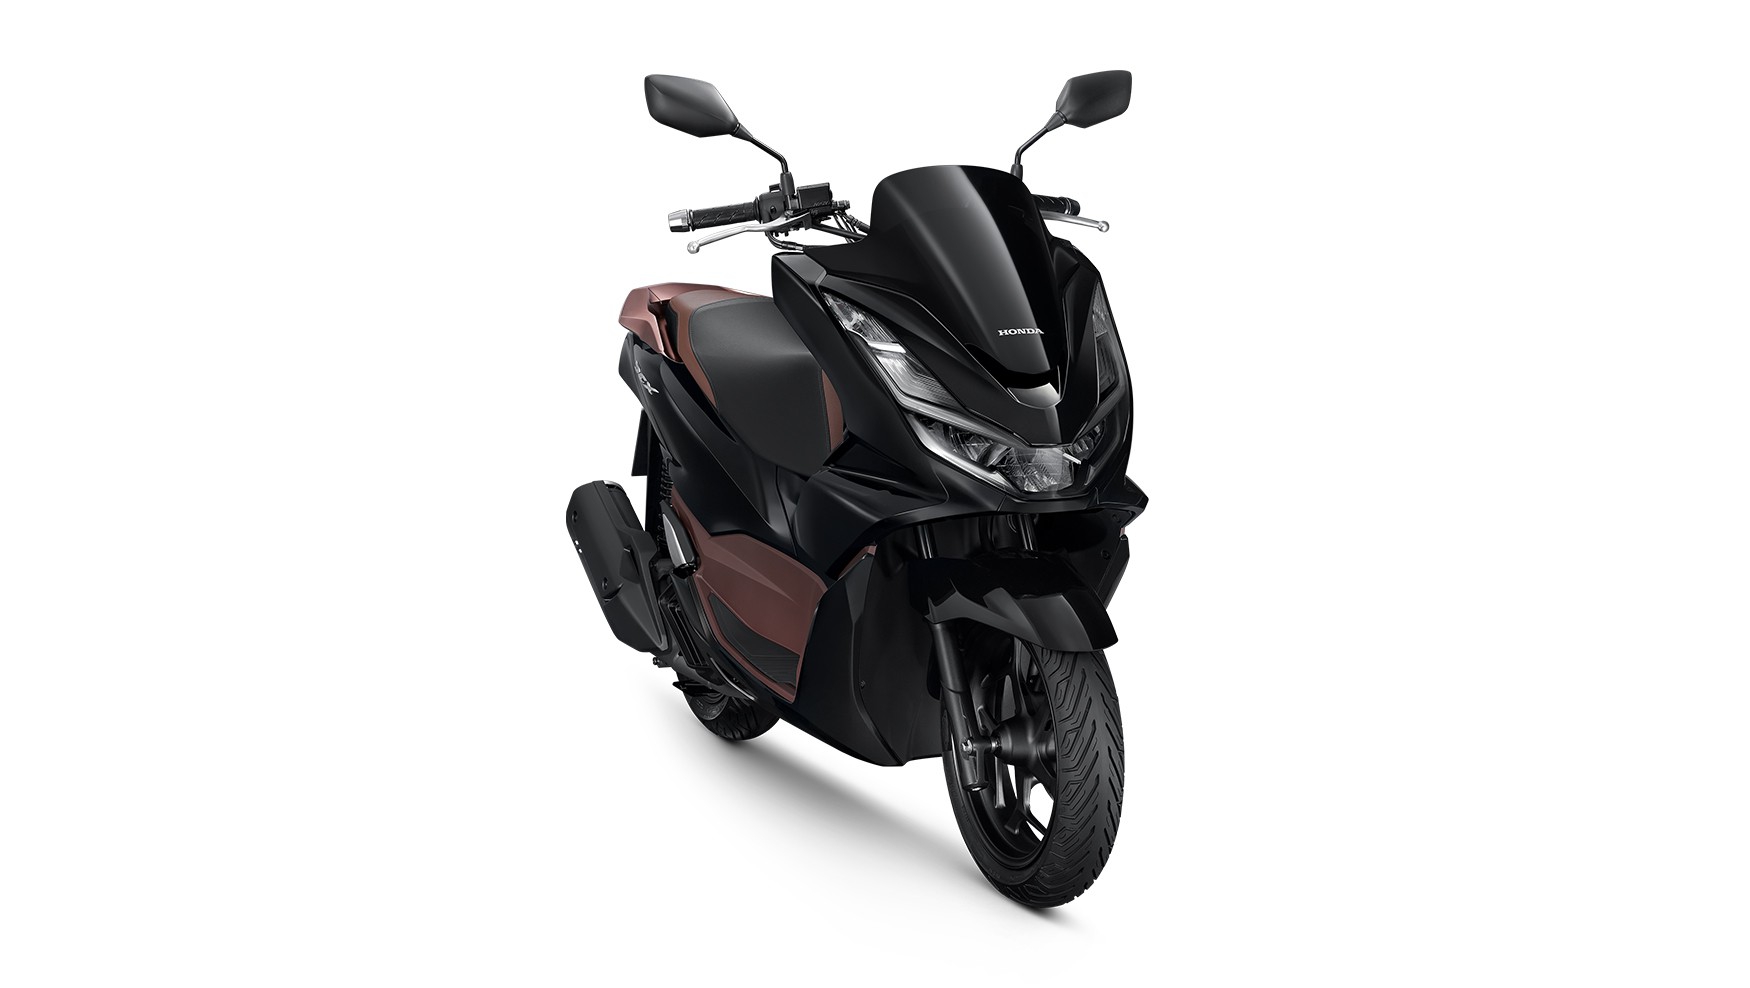 Honda Adv 160 Is On The Way With 4 Valve 157cc Engine Hstc